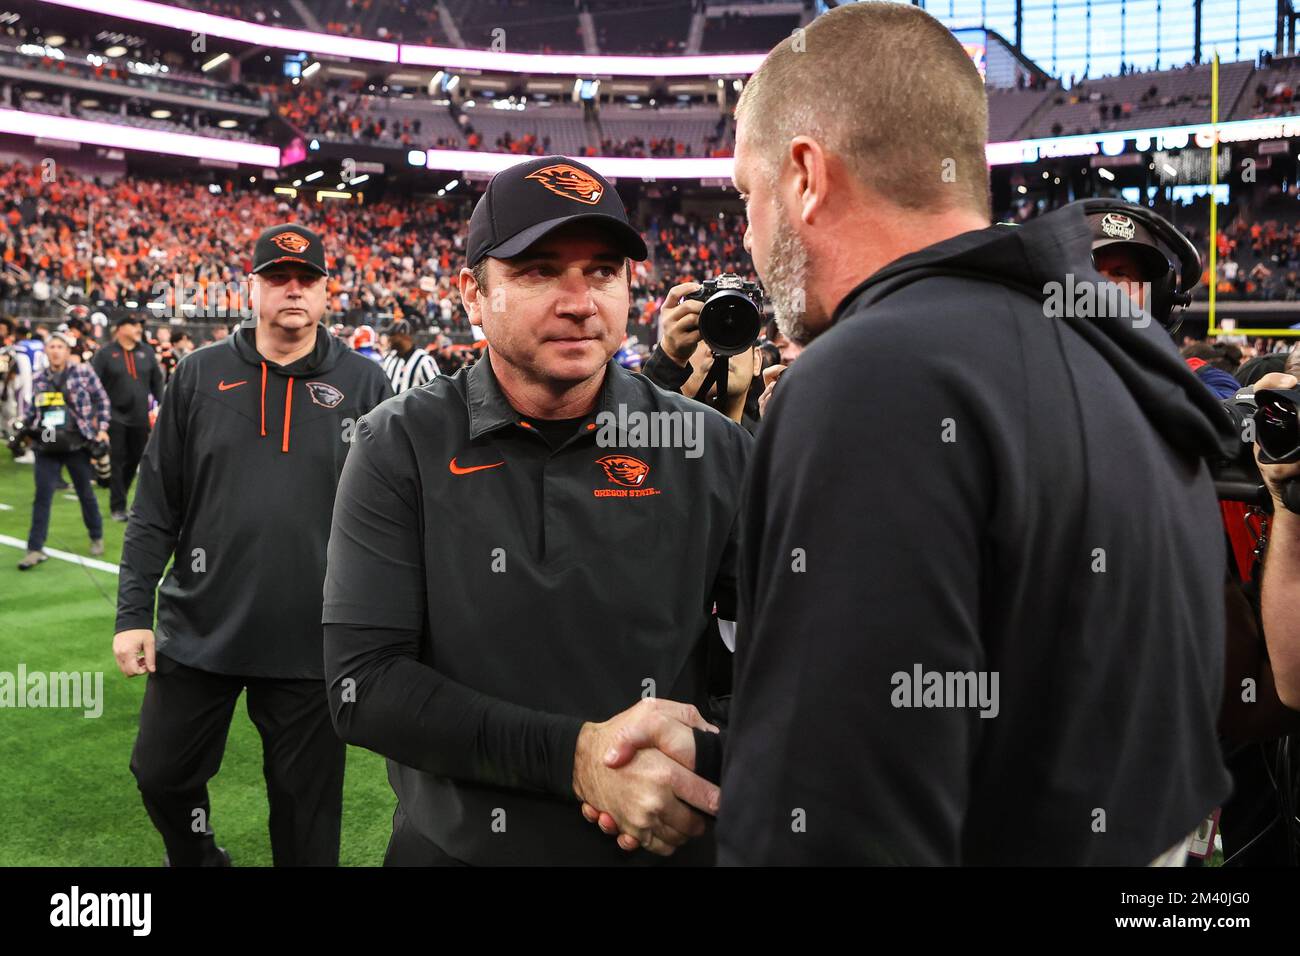 Las Vegas, NV, USA. 17th Dec, 2022. Oregon State Beavers head coach Jonathan Smith and Florida Gators head coach Billy Napier shake hands at the conclusion of the SRS Distribution Las Vegas Bowl featuring the Florida Gators and the Oregon State Beavers at Allegiant Stadium in Las Vegas, NV. Christopher Trim/CSM/Alamy Live News Stock Photo